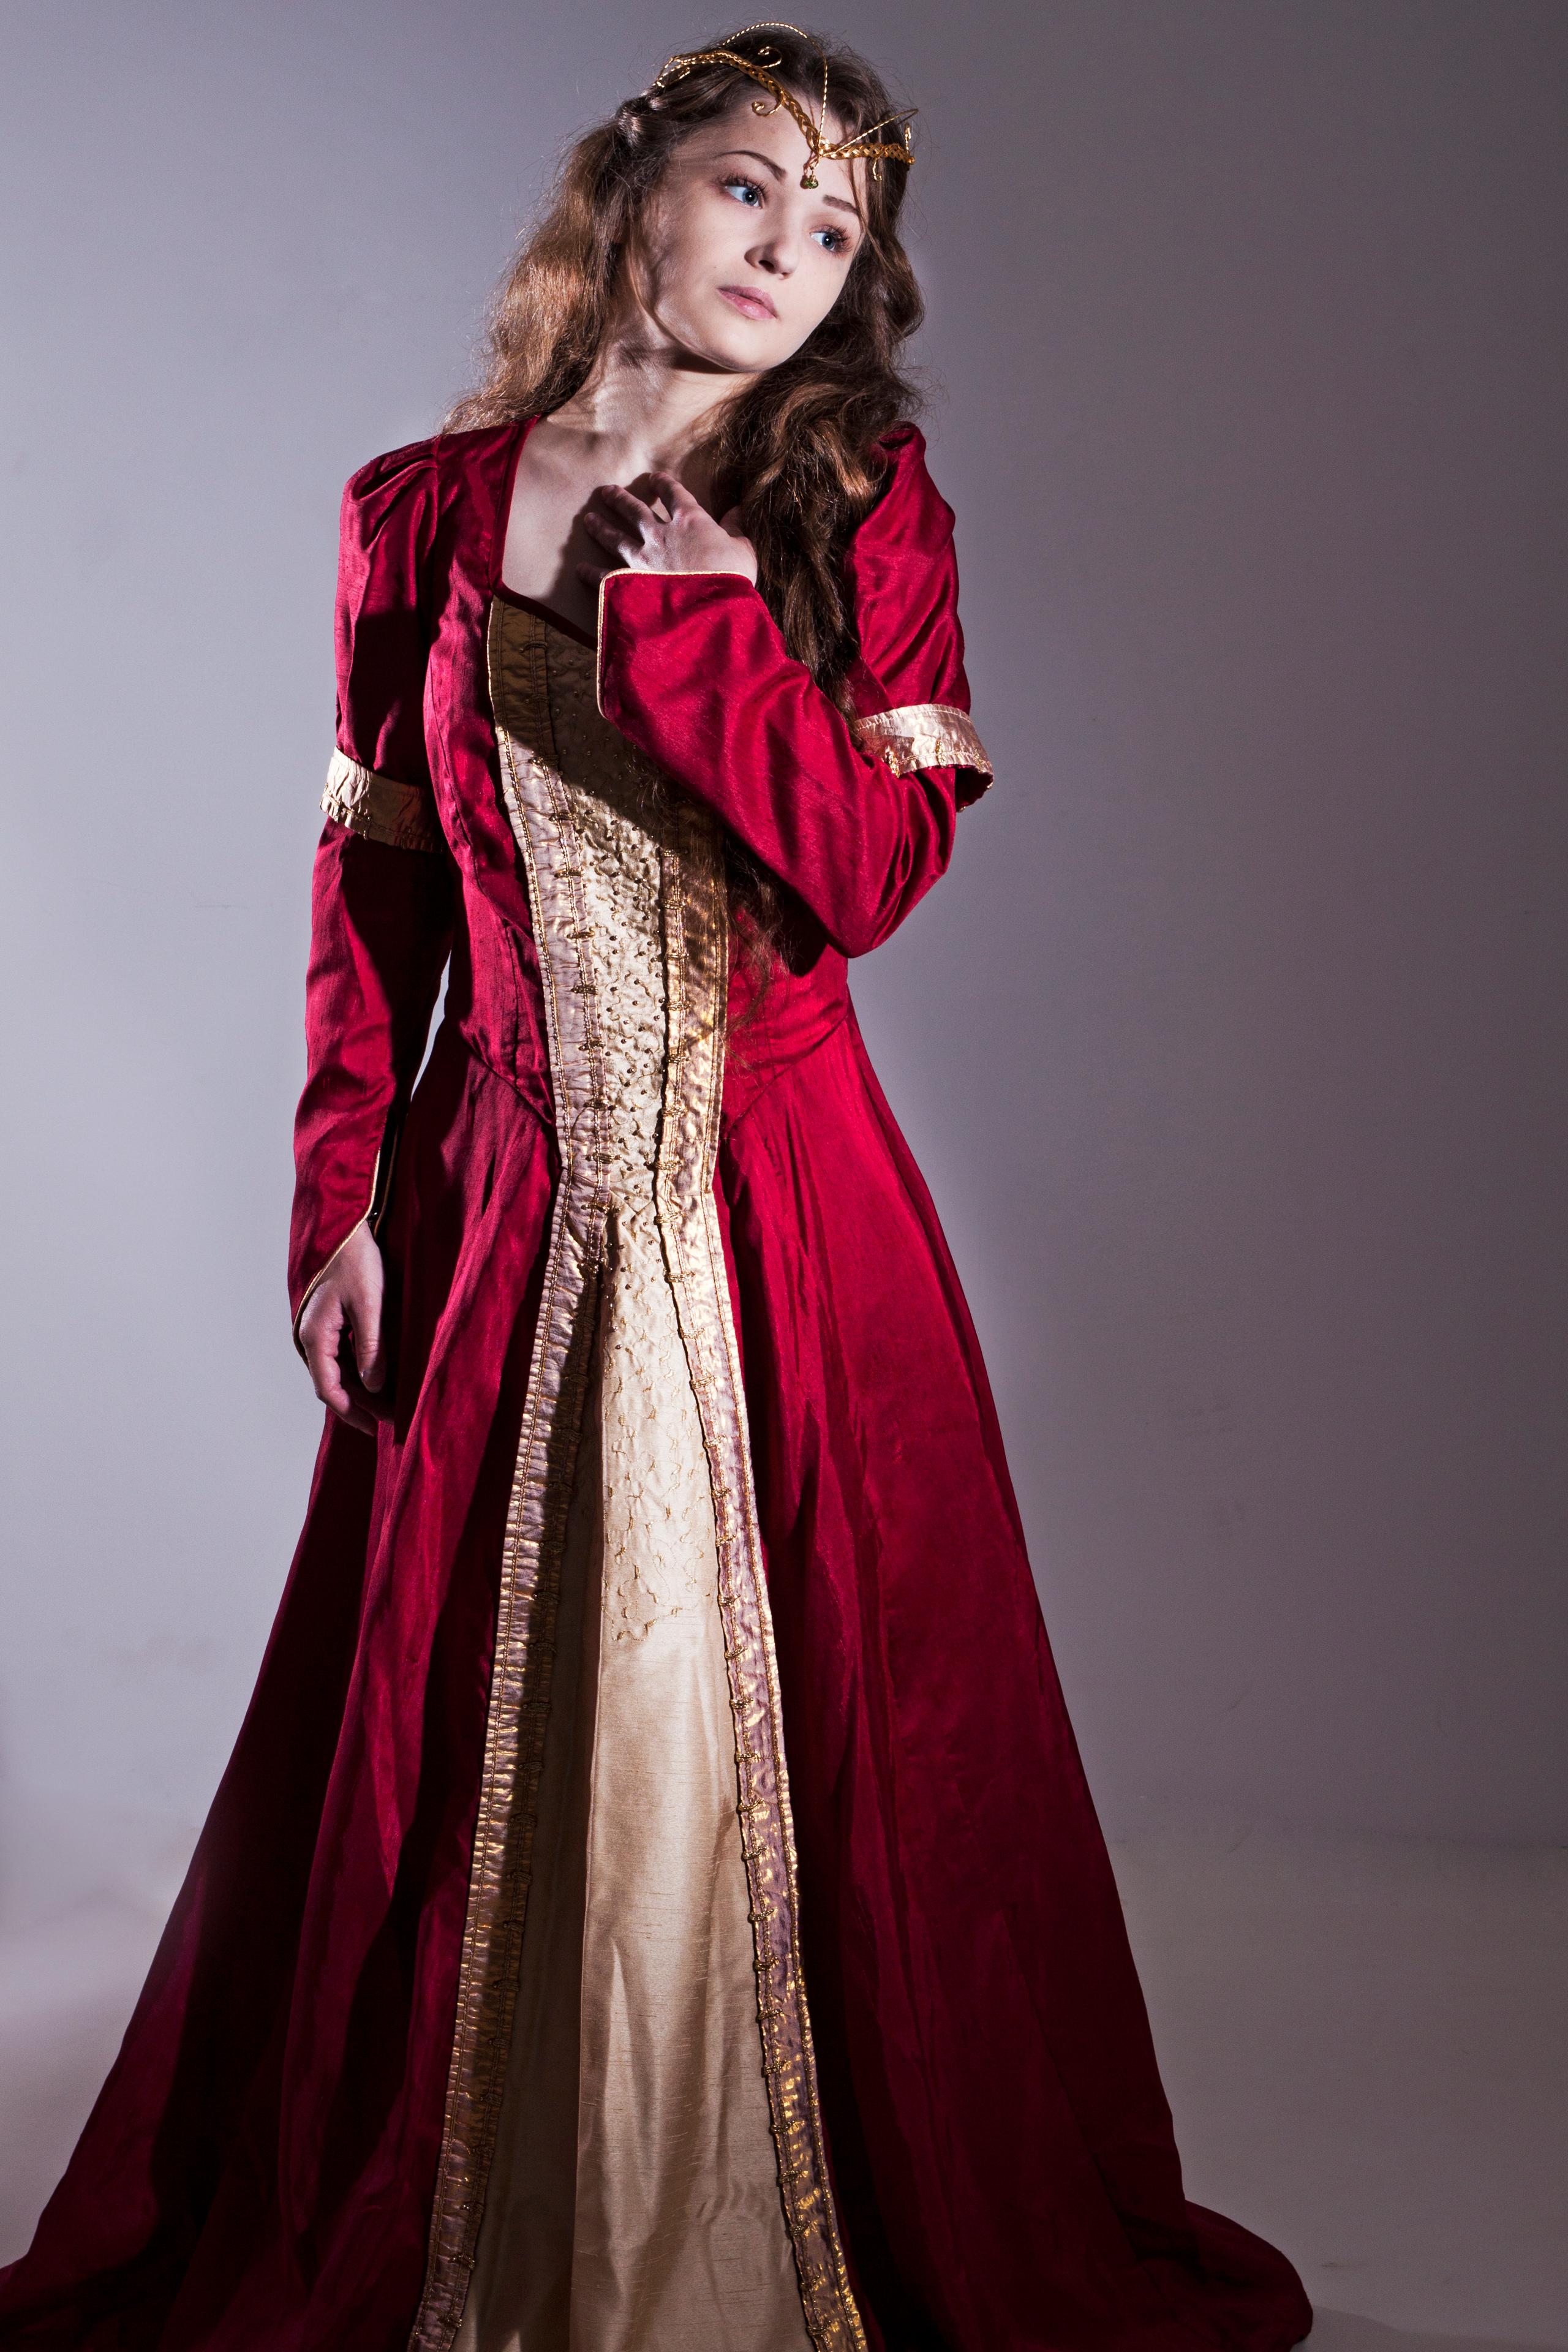 red medieval gown with lighter front panel. Embroidered and beaded